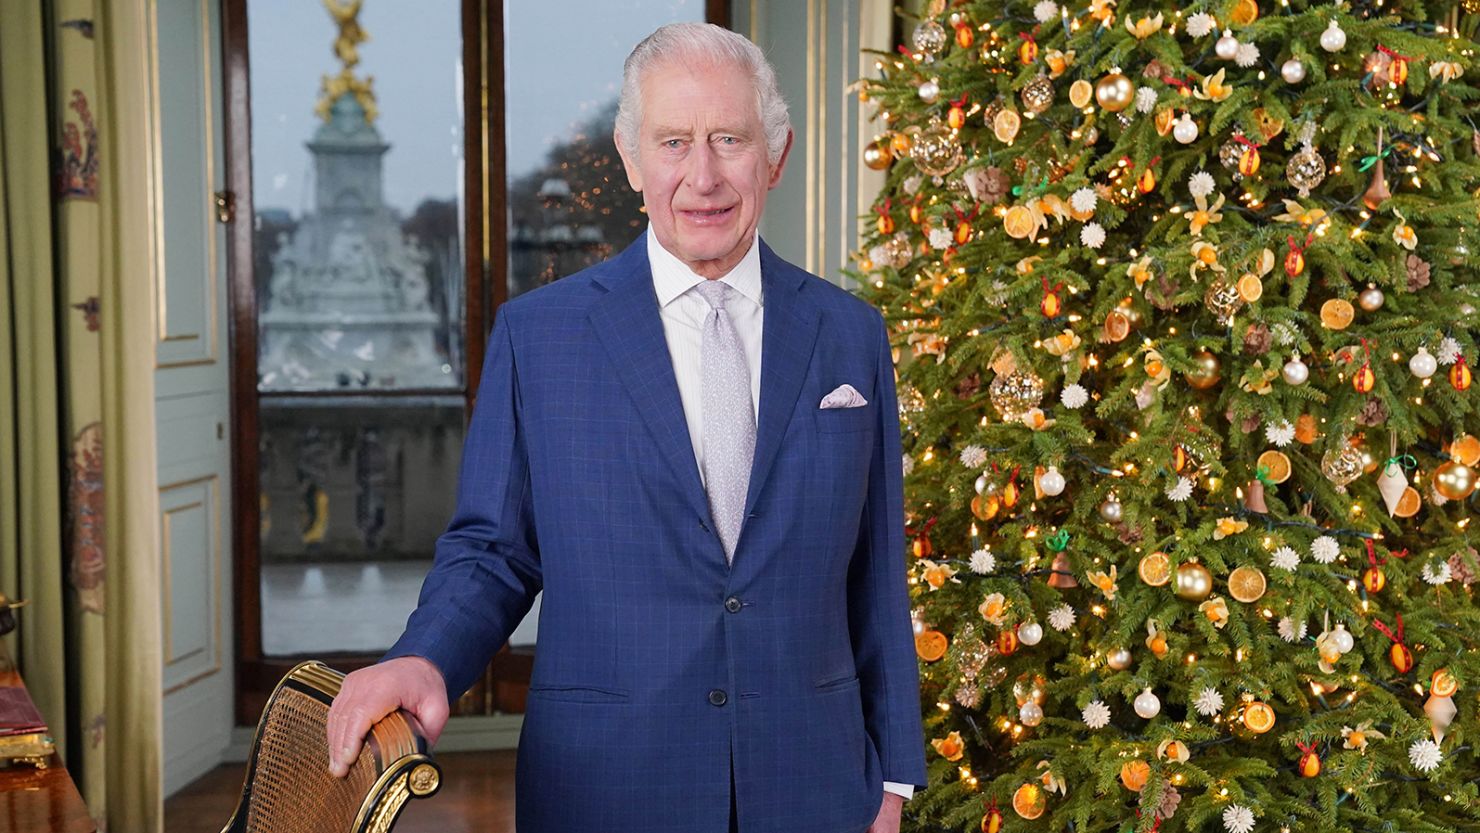 King Charles III calls for compassion in Christmas address CNN